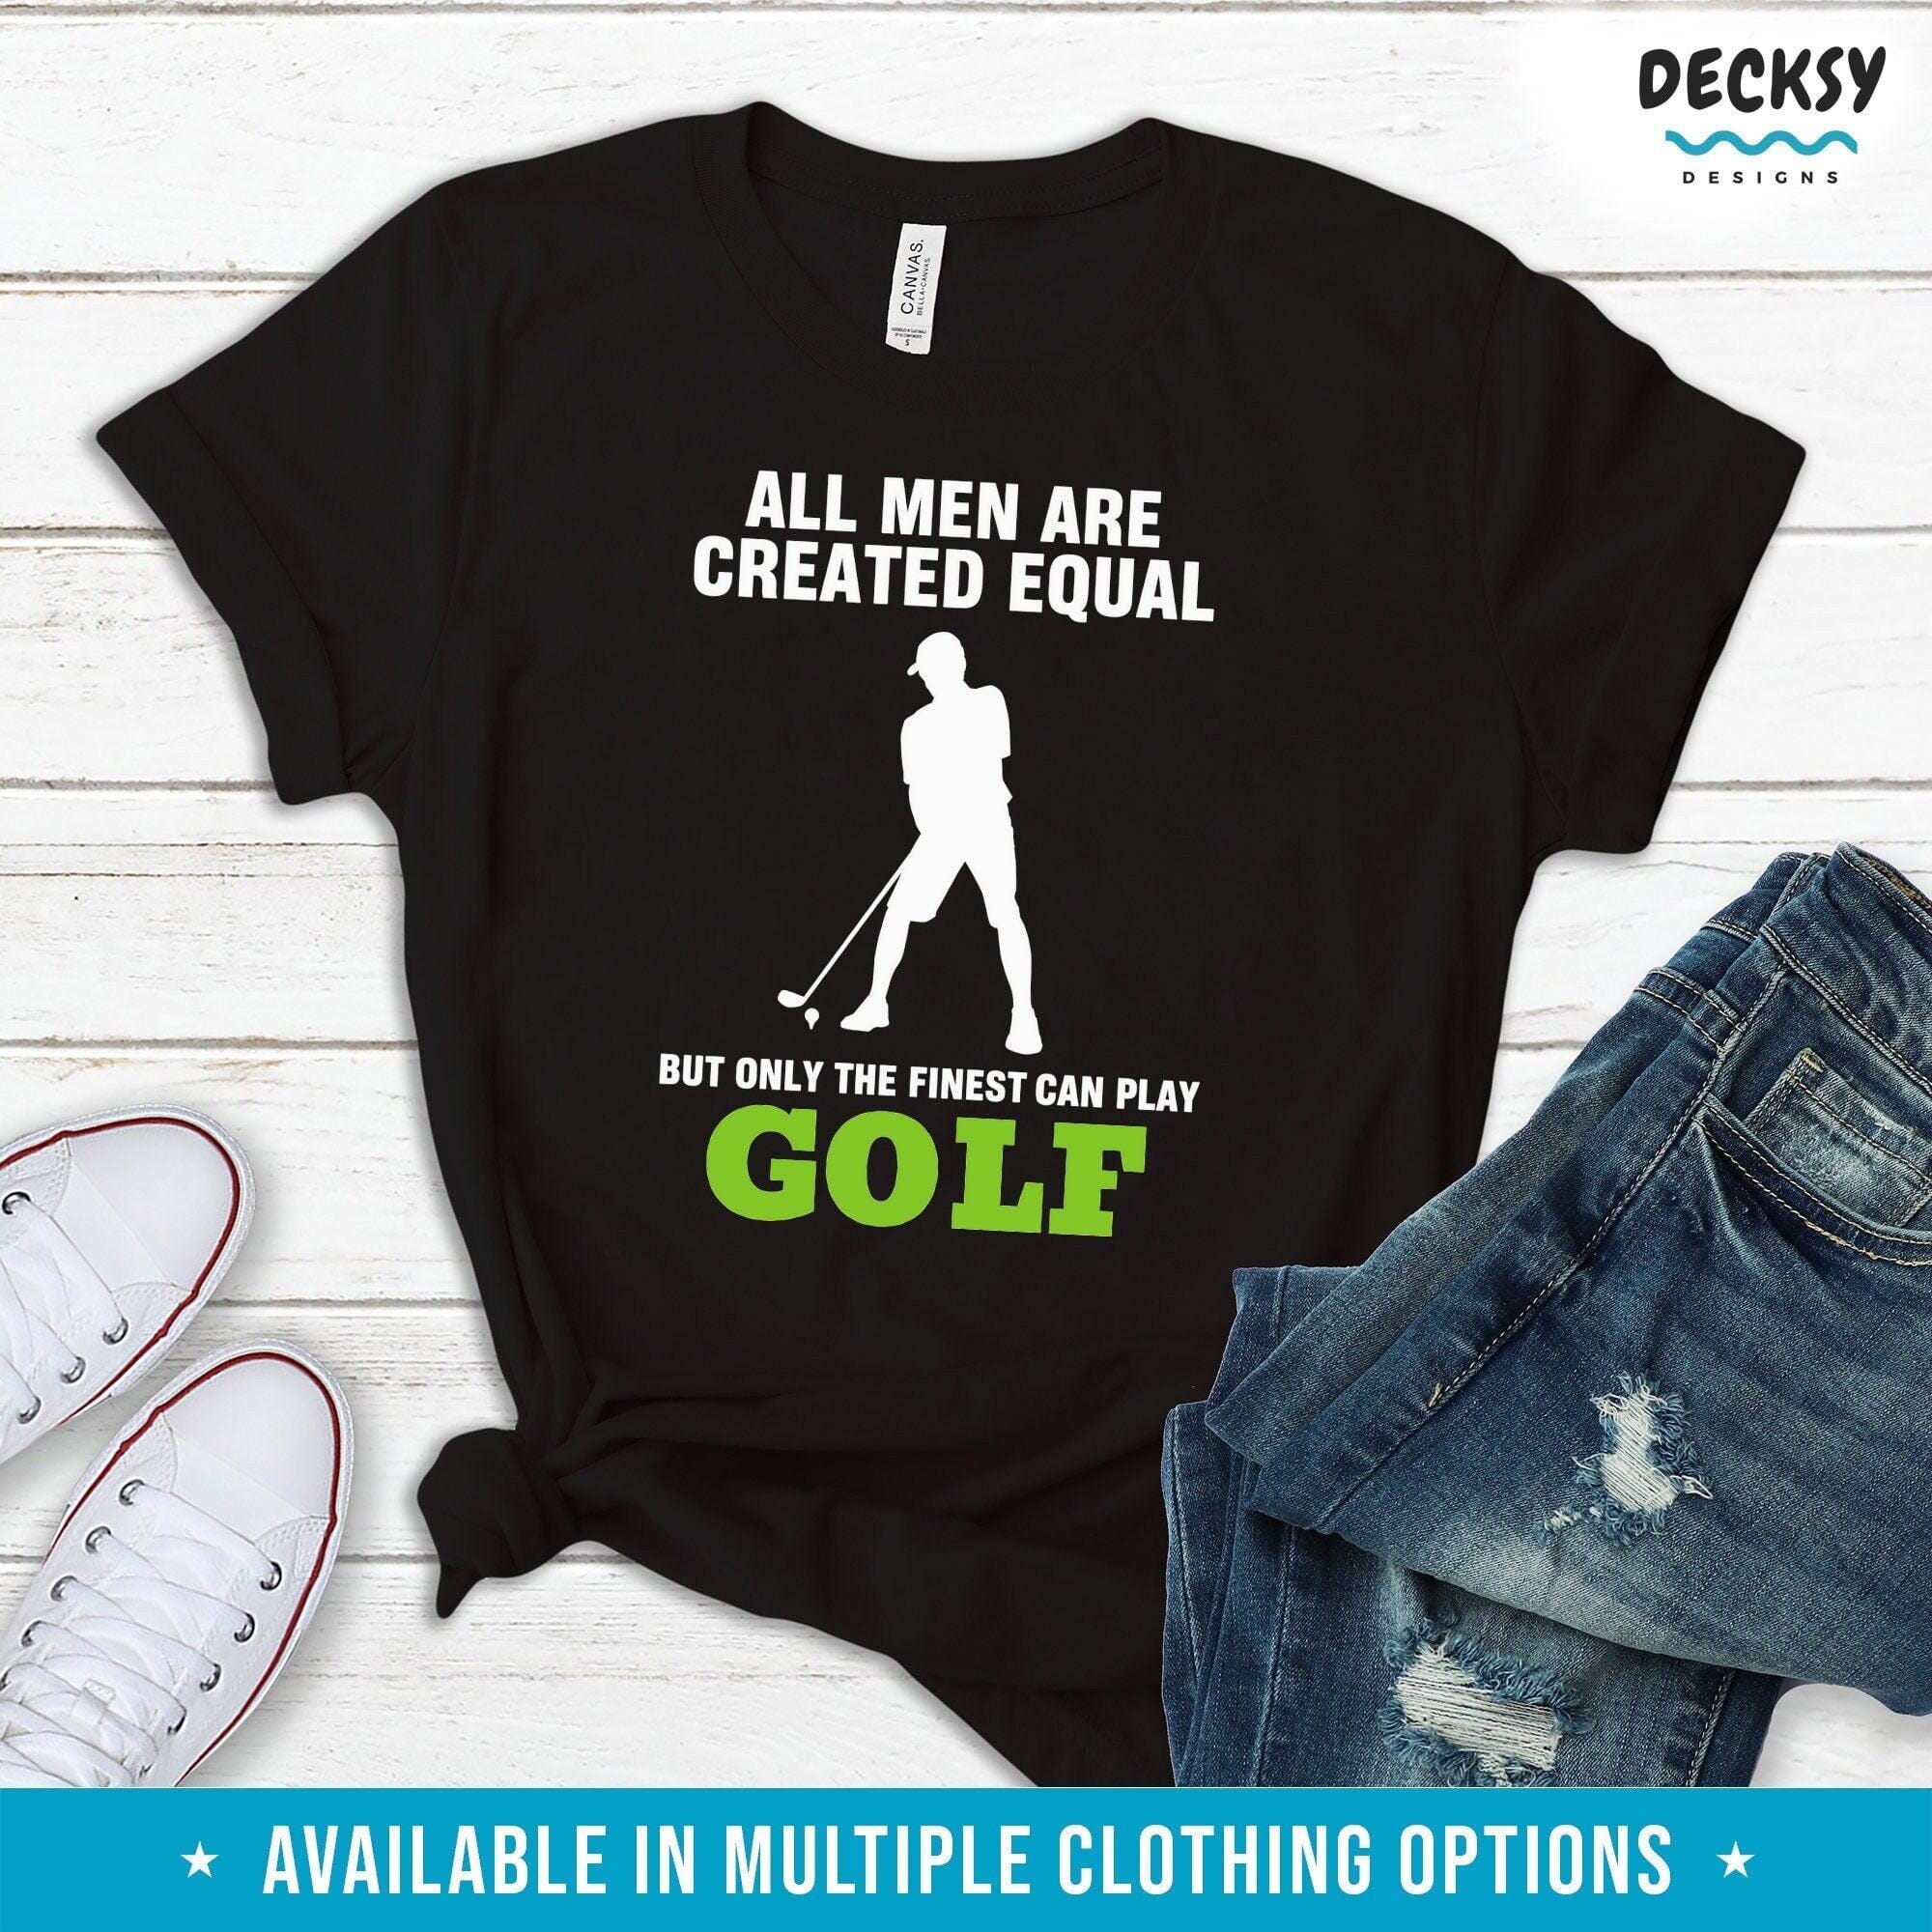 Golf Dad Shirt, Golf Husband Gift-Clothing:Gender-Neutral Adult Clothing:Tops & Tees:T-shirts:Graphic Tees-DecksyDesigns